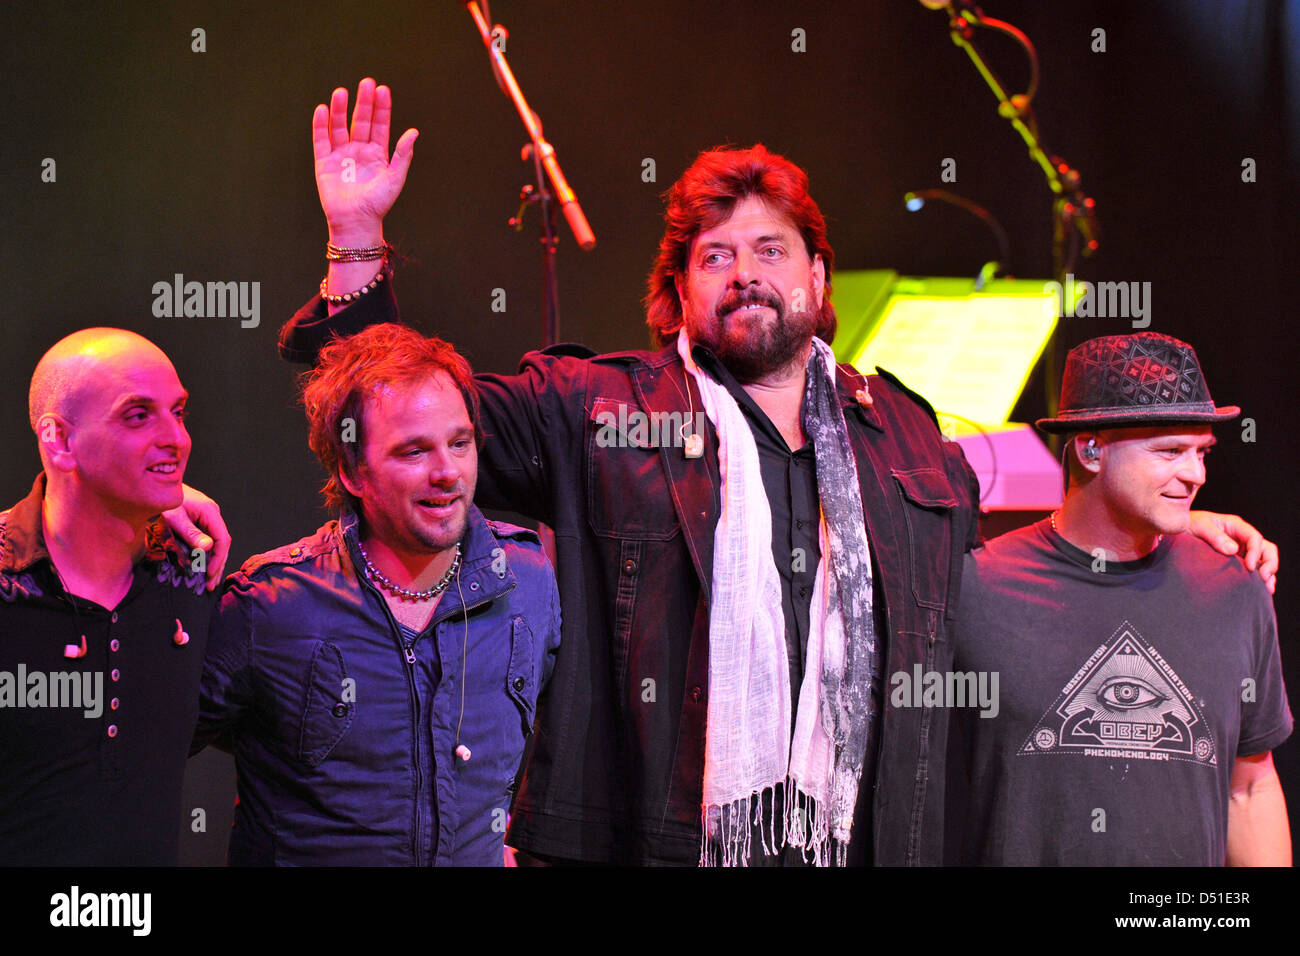 Musicians (L-R) Guy Erez, P.J. Olsson, Alan Parsons and Todd Cooper, pictured during a concert of the Alan Parsons Live Project in Eindhoven, The Netherlands, 01 December 2010.  Foto: Revierfoto Stock Photo